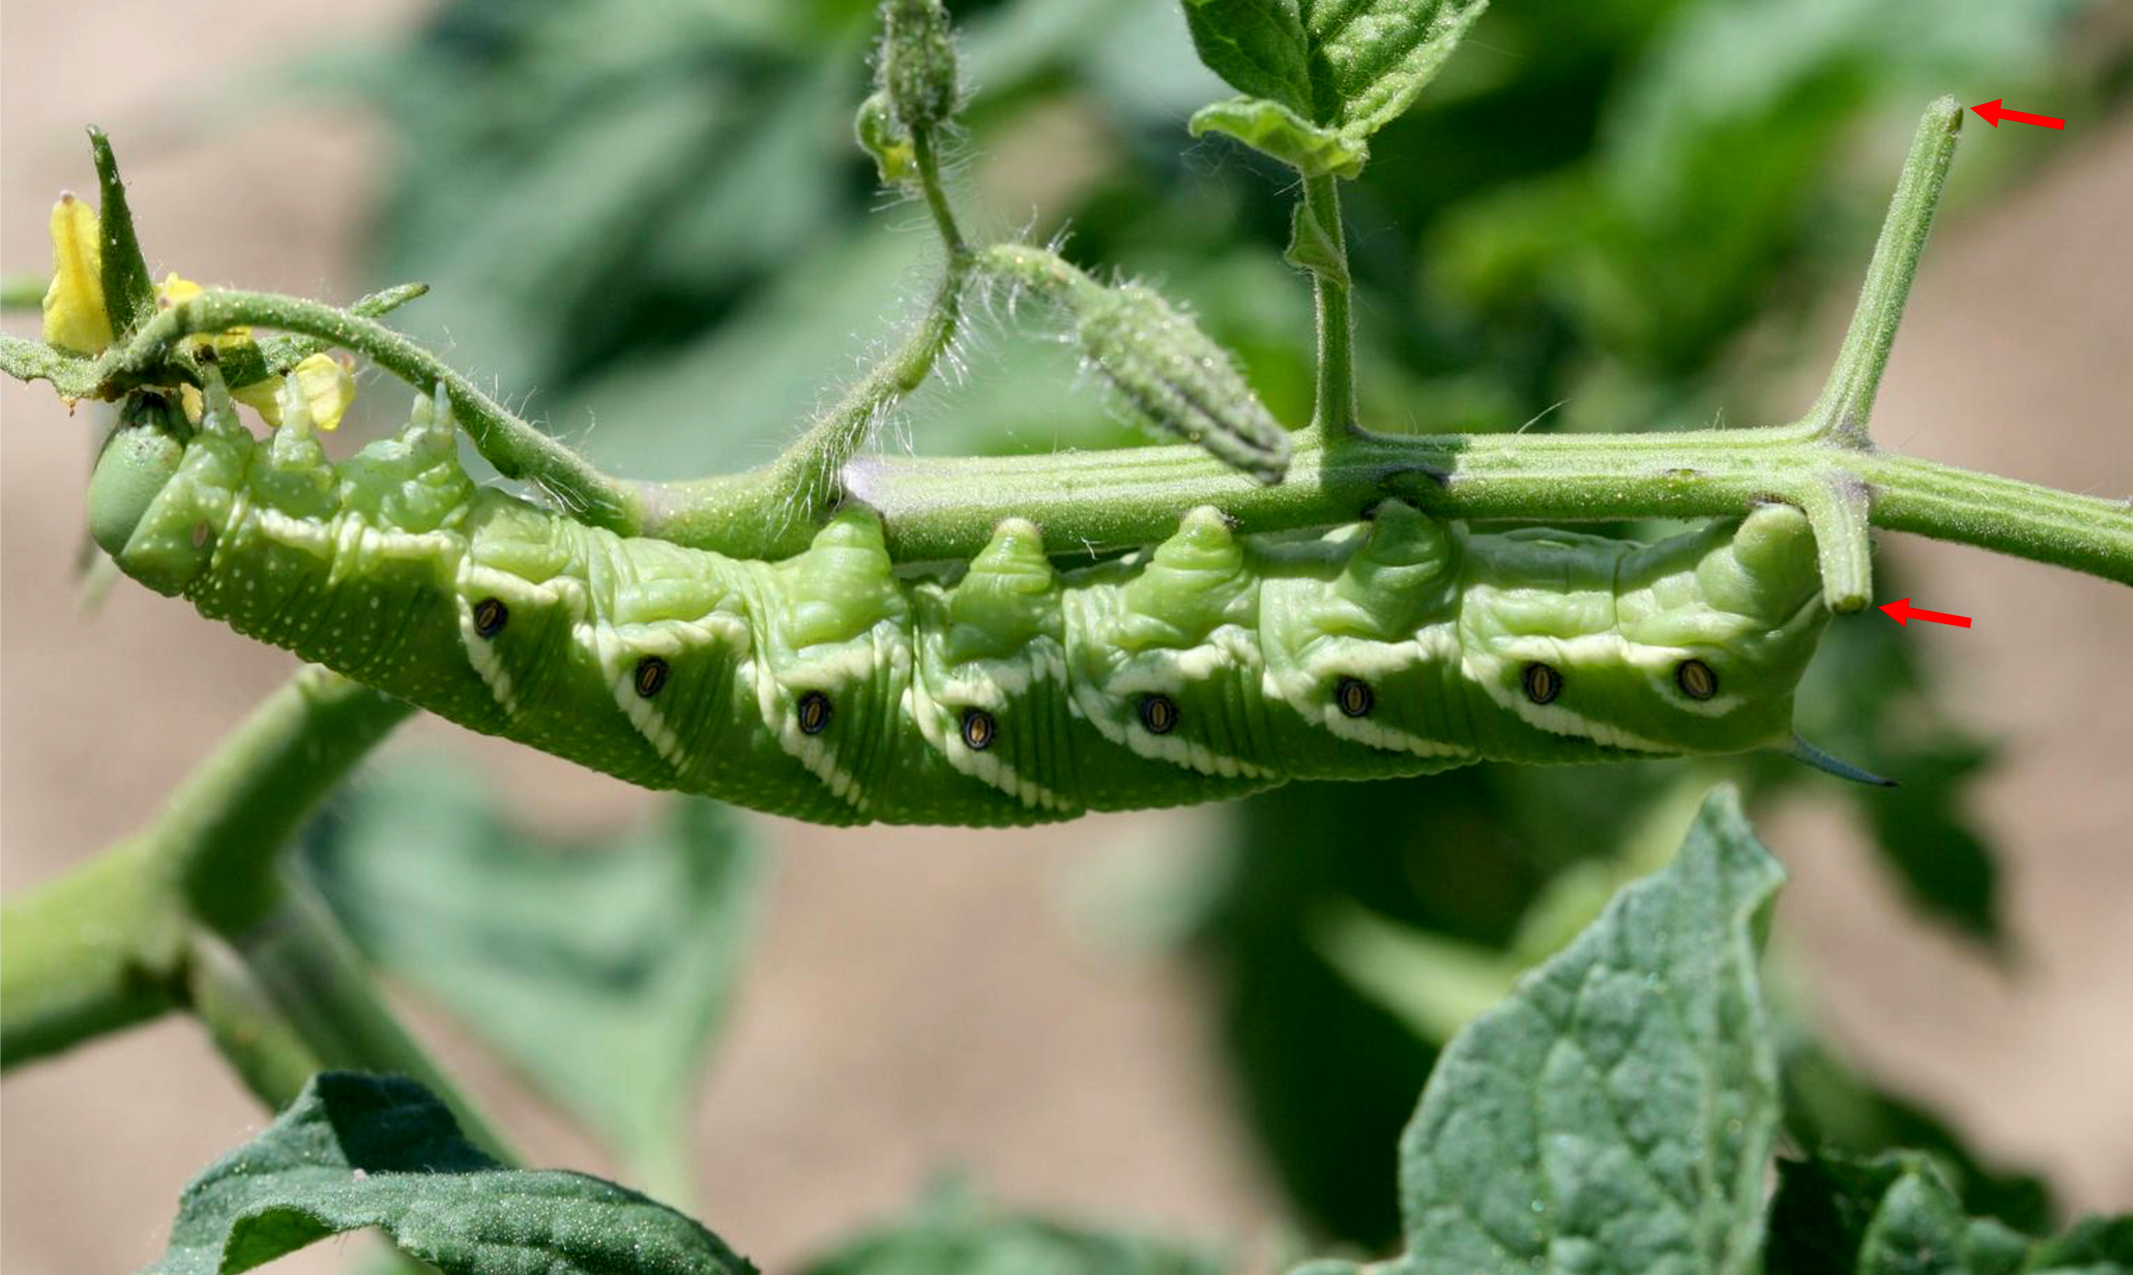 This tomato hornworm continues feeding on a plant after consuming two leaves (see arrows). Hornworm caterpillars blend in with the foliage, so they often go undetected until damage is severe. Photo courtesy of Whitney Cranshaw.